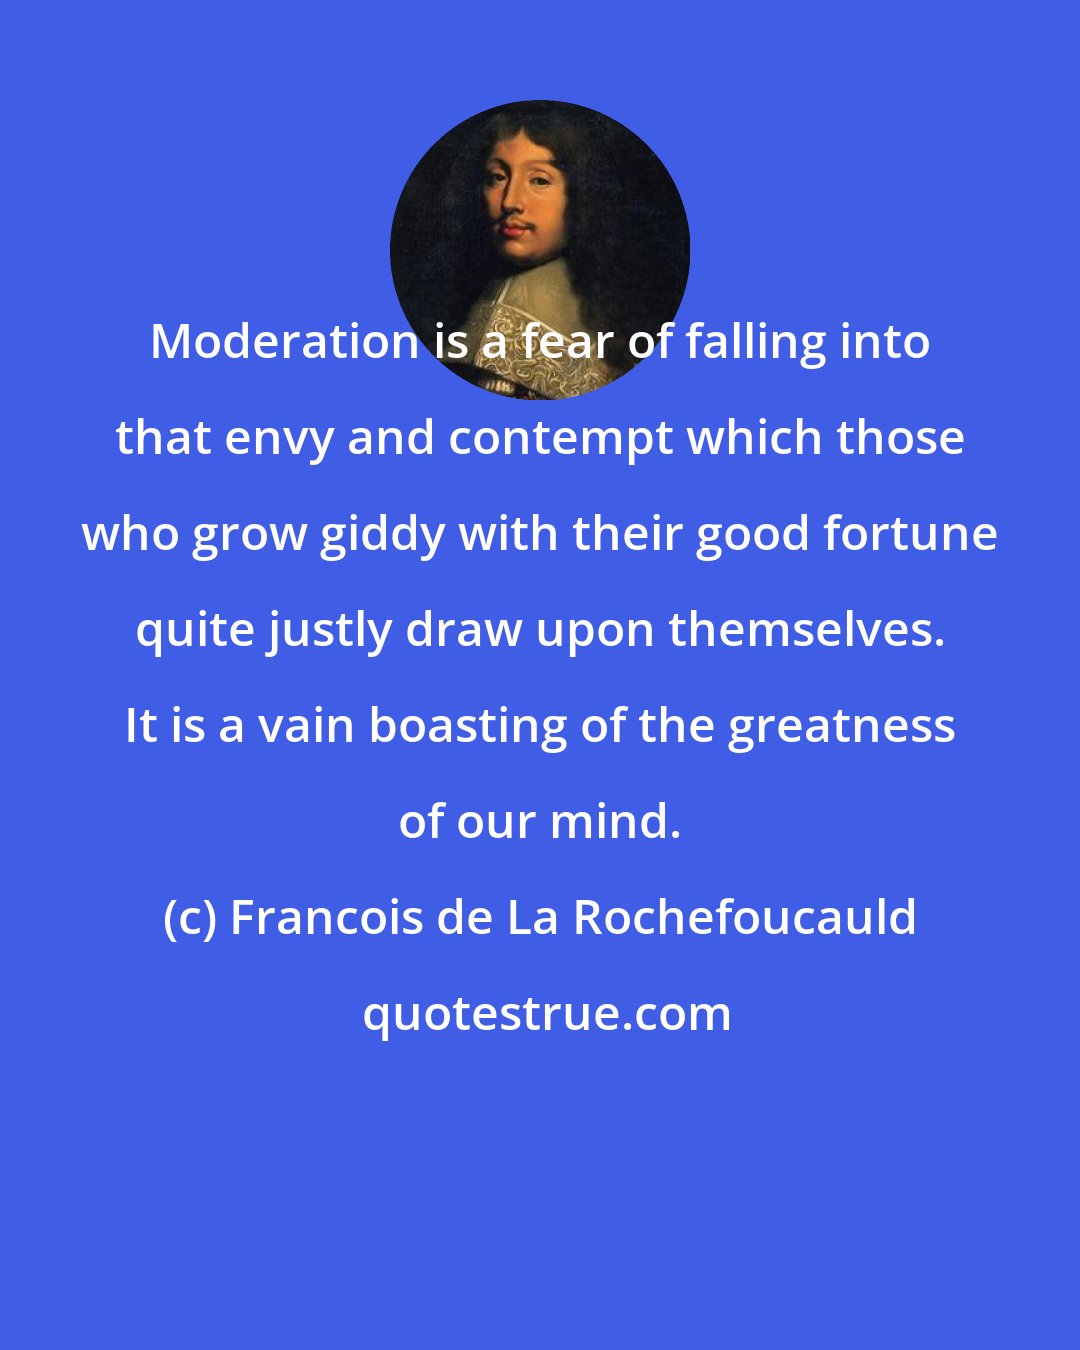 Francois de La Rochefoucauld: Moderation is a fear of falling into that envy and contempt which those who grow giddy with their good fortune quite justly draw upon themselves. It is a vain boasting of the greatness of our mind.